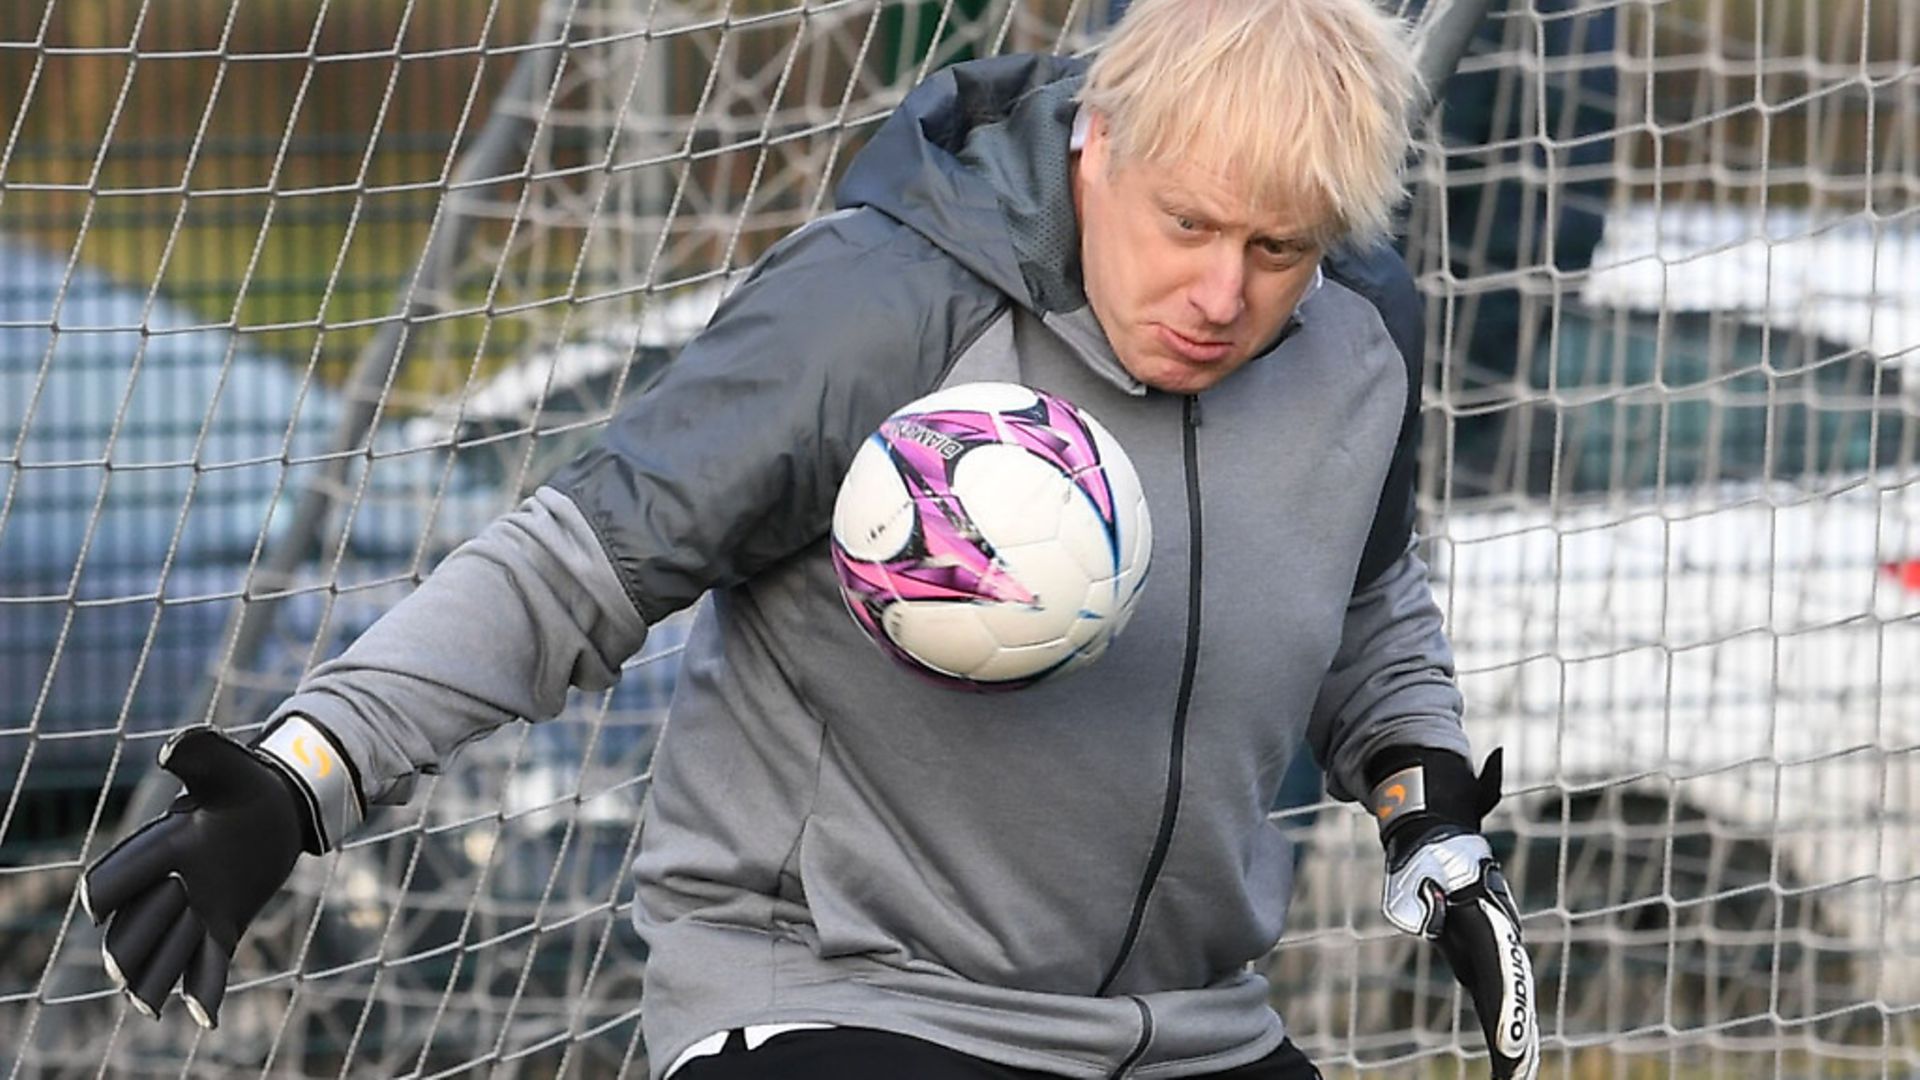 Prime minister Boris Johnson plays football during the election campaign. Photograph: Stefan Rousseau/PA. - Credit: PA Wire/PA Images